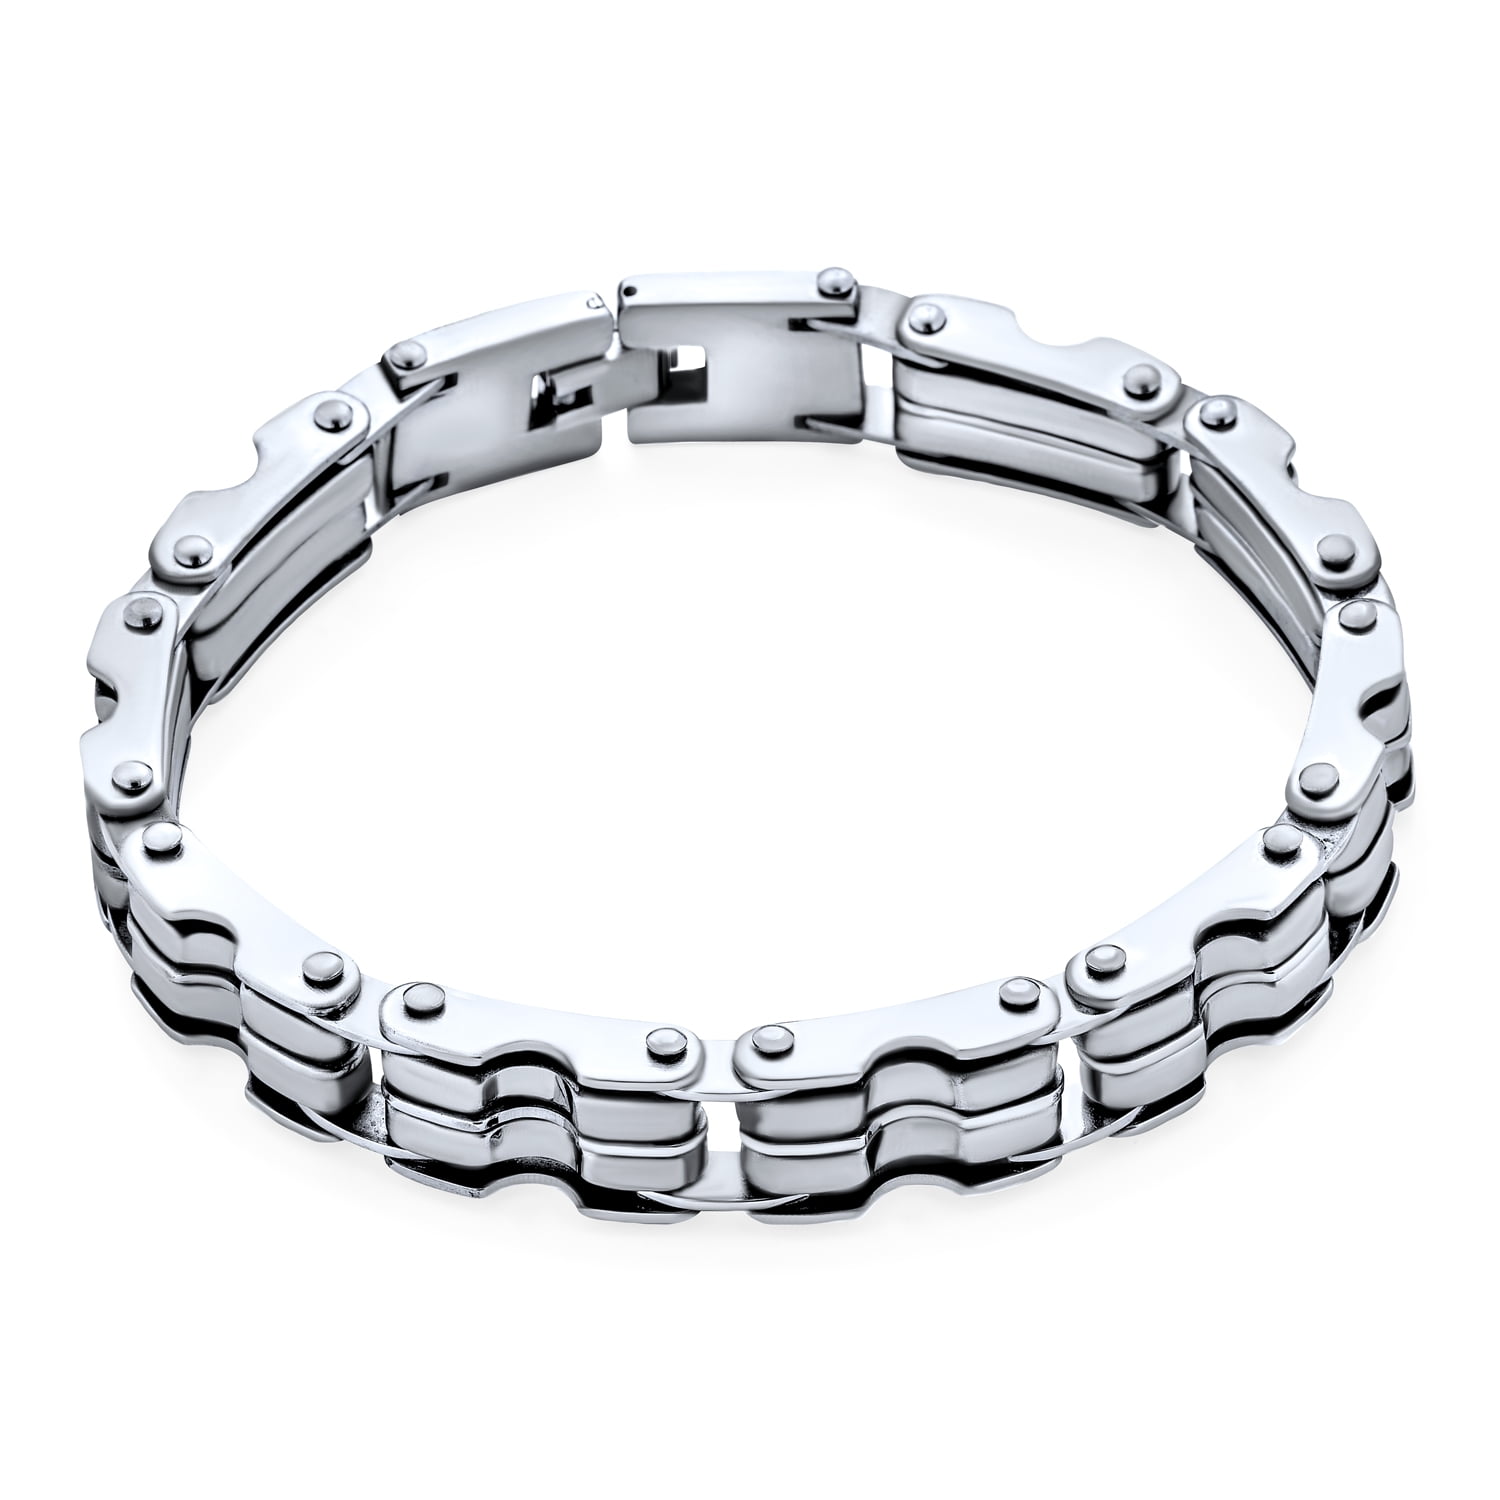 Burberry Bicycle Chain Silver-Tone Bracelet Release | Hypebeast